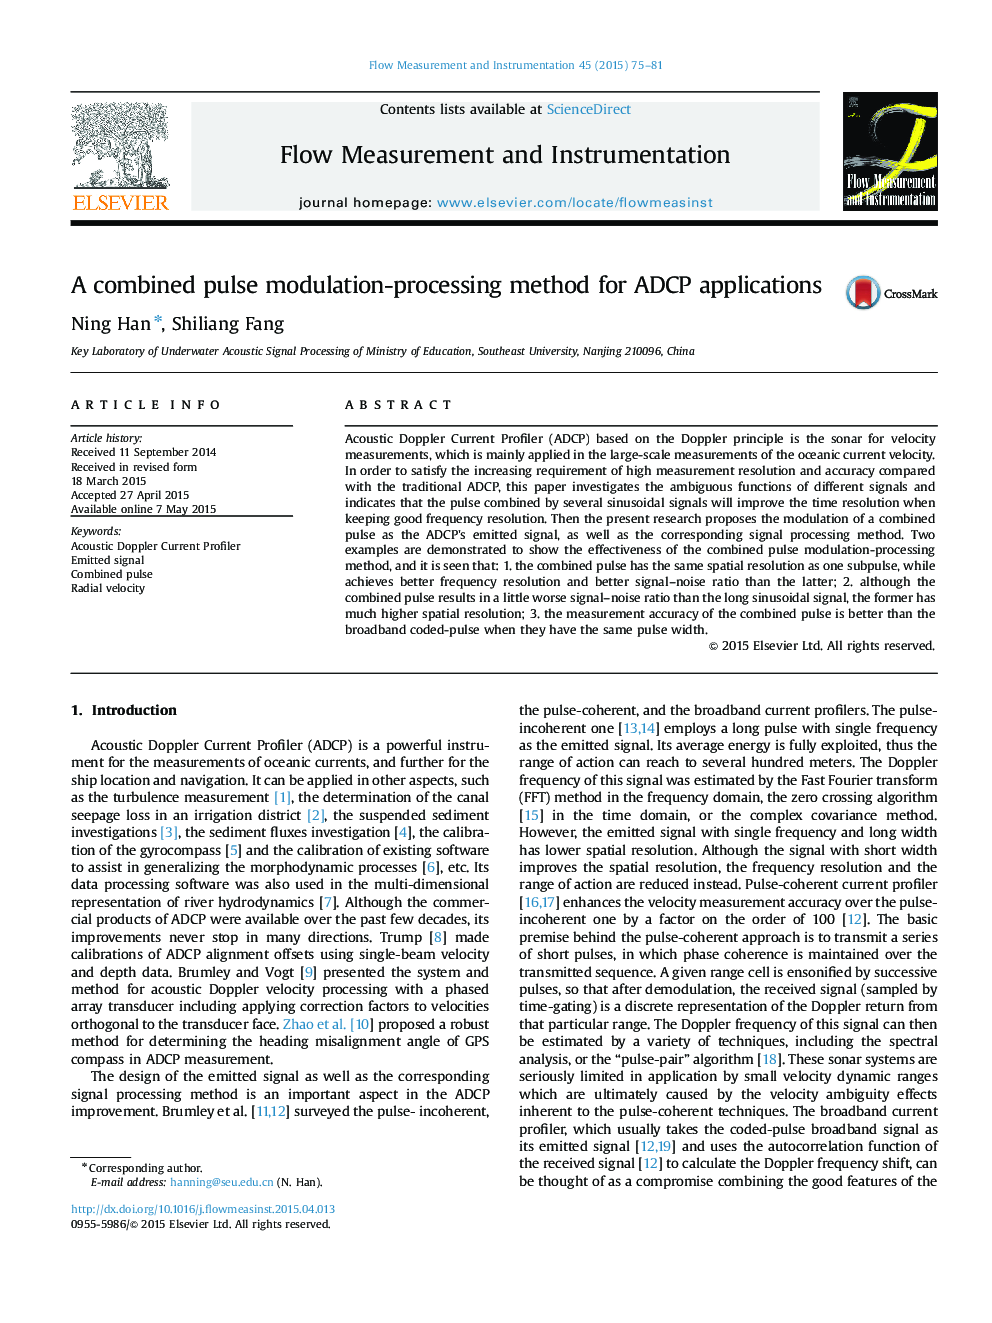 A combined pulse modulation-processing method for ADCP applications